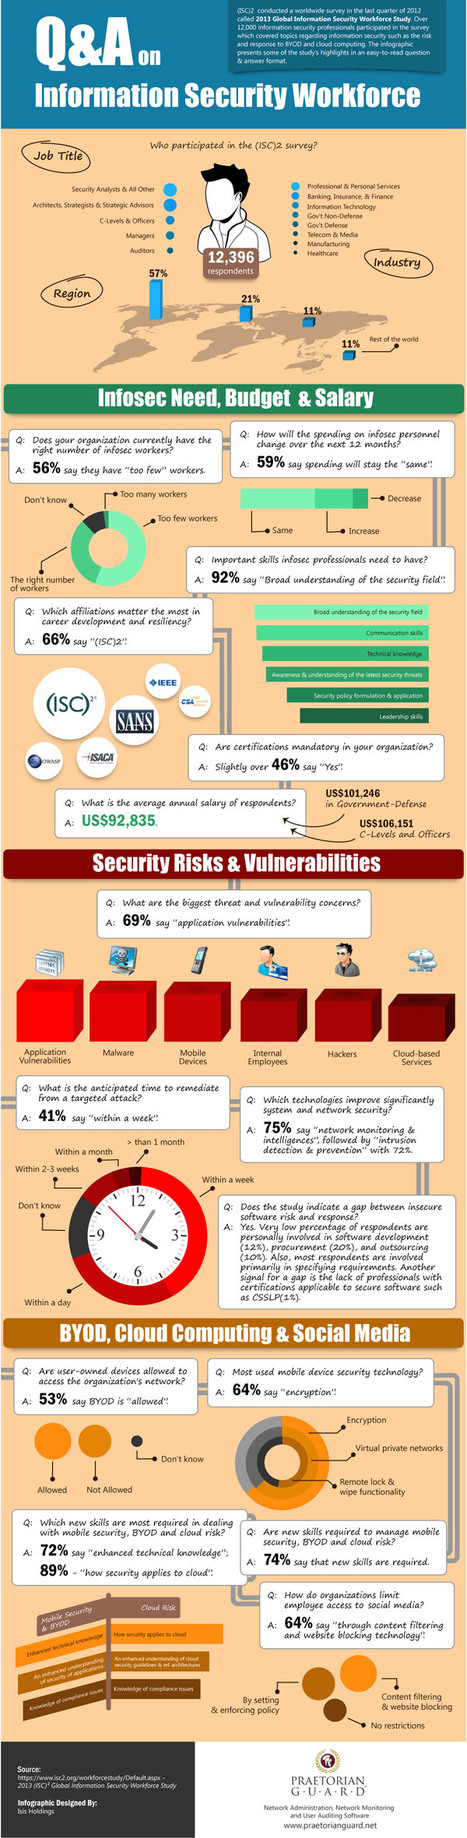 Infographic: Q&A on Information Security Workforce | Web 2.0 for juandoming | Scoop.it